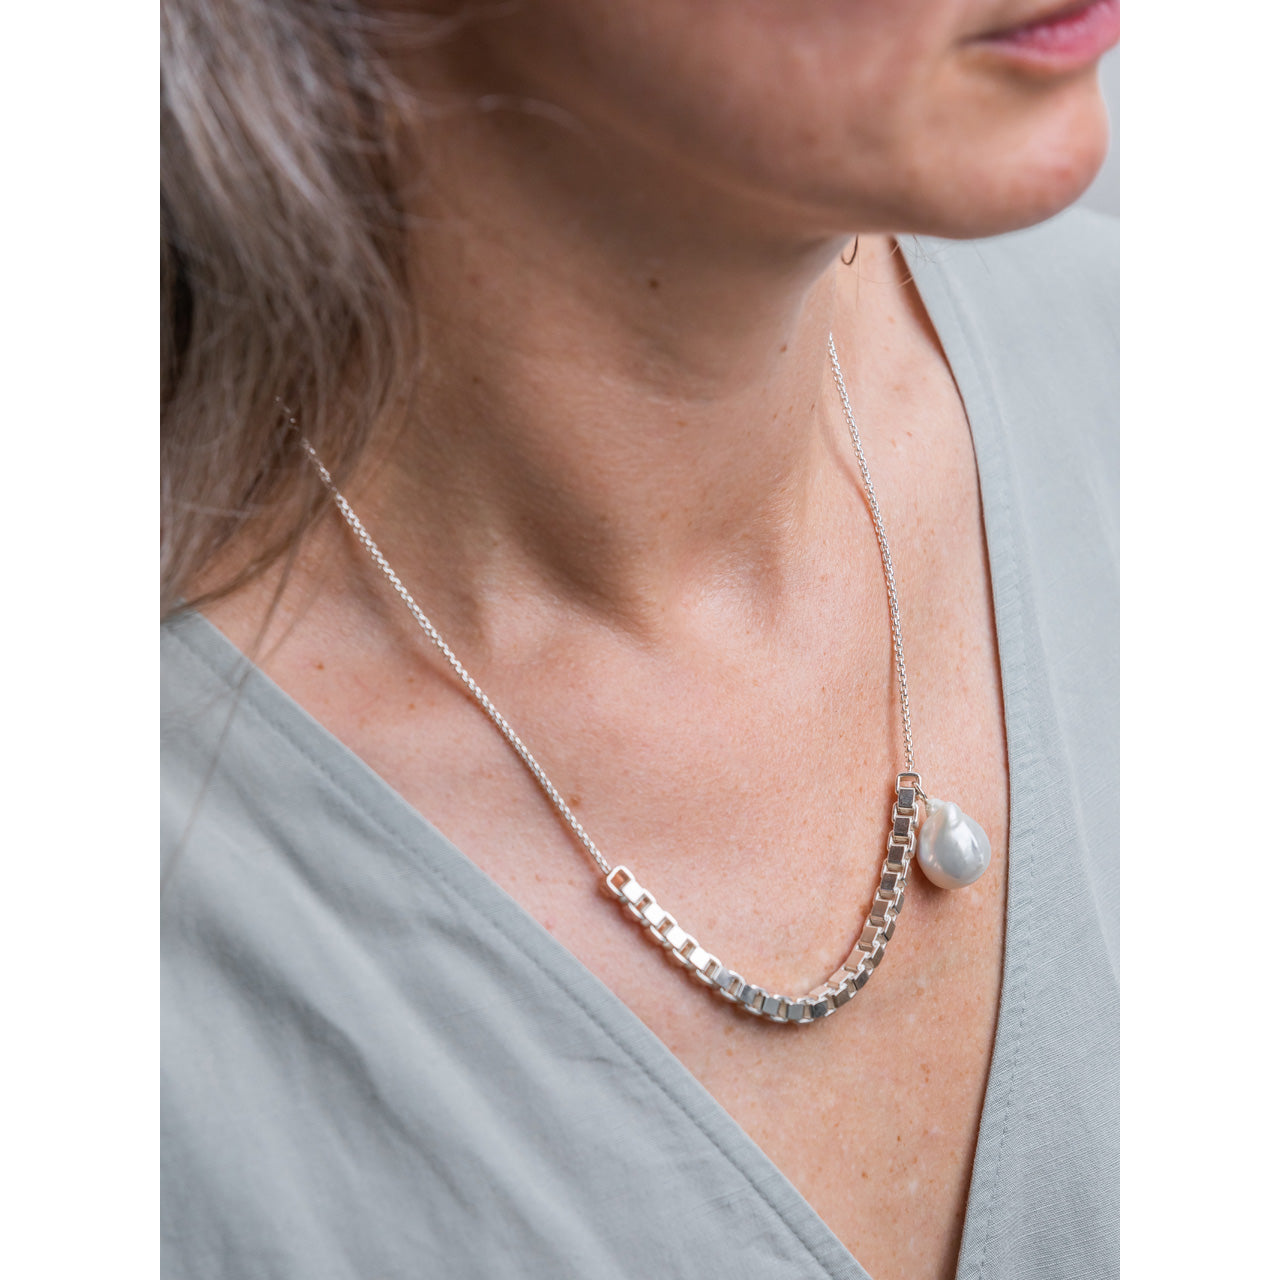 silver statement baroque pearl necklace